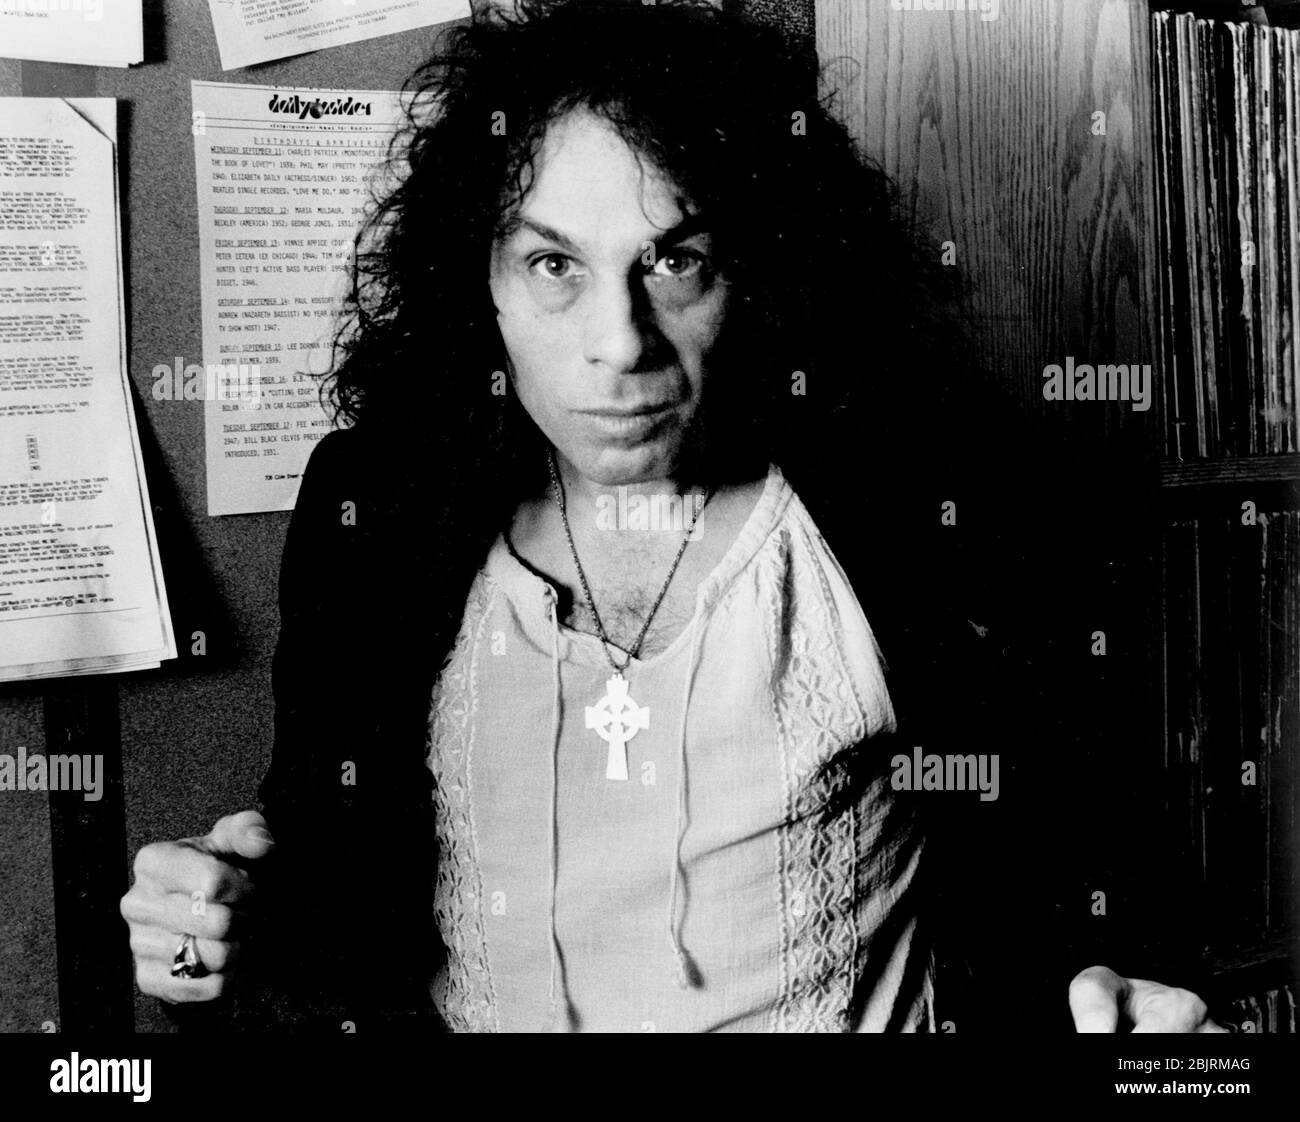 Ronnie James Dio (July 10, 1942 Ð May 16, 2010) was an American heavy metal vocalist and songwriter. He performed with Elf, Rainbow, Black Sabbath, Heaven & Hell, and his own band Dio. Credit: Scott Weiner/MediaPunch Stock Photo